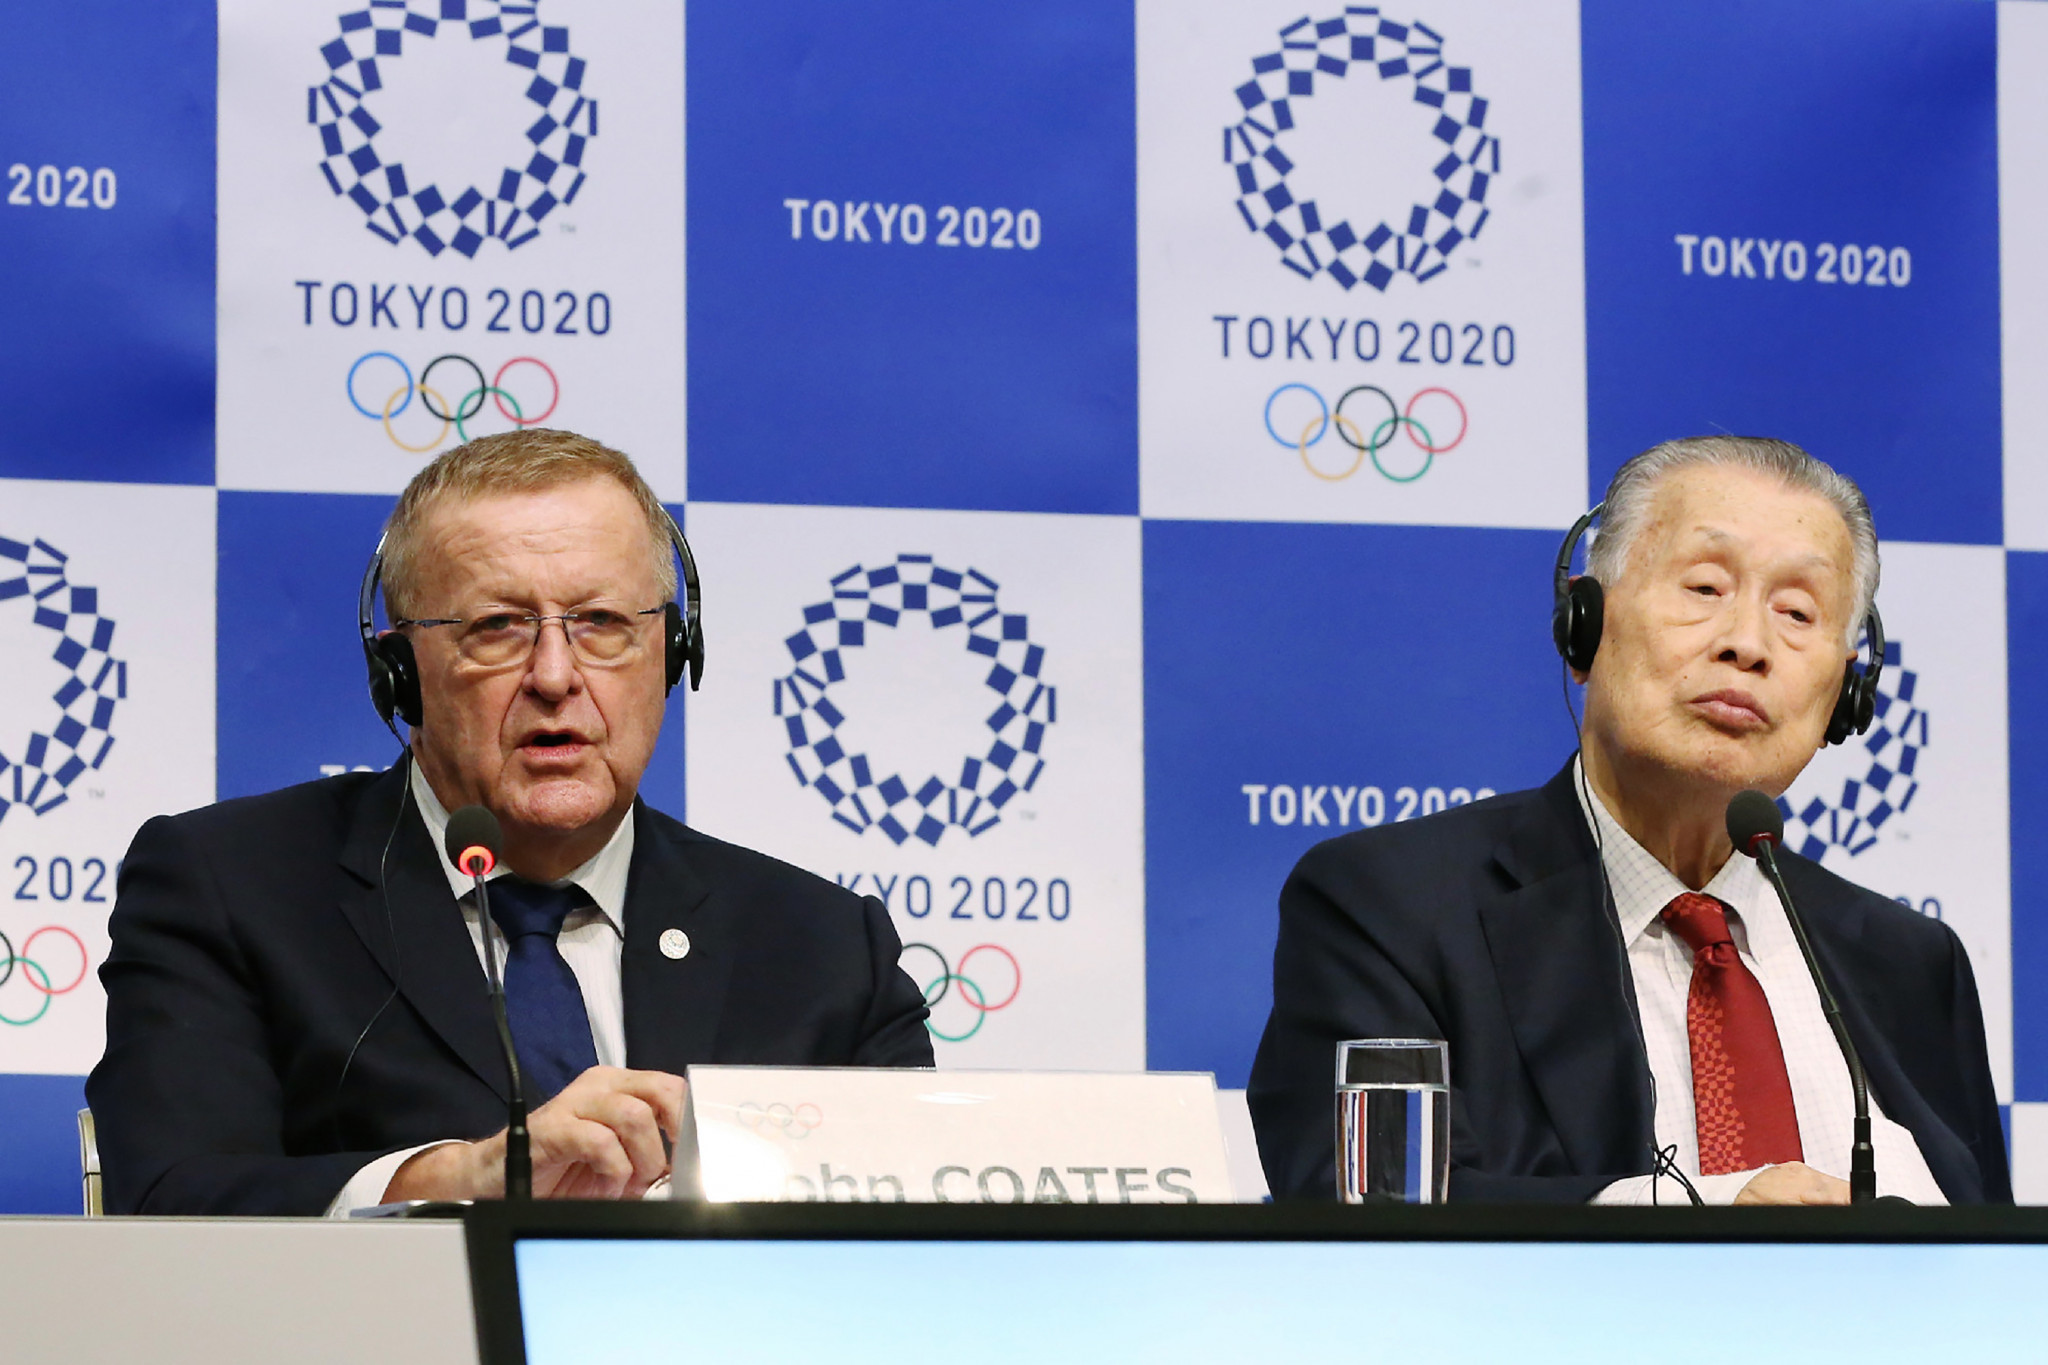 The IOC and Tokyo 2020 lowered expectations of a reduced budget at the Coordination Commission meeting in the Japanese capital earlier this month but promised it would not raise ©Getty Images 